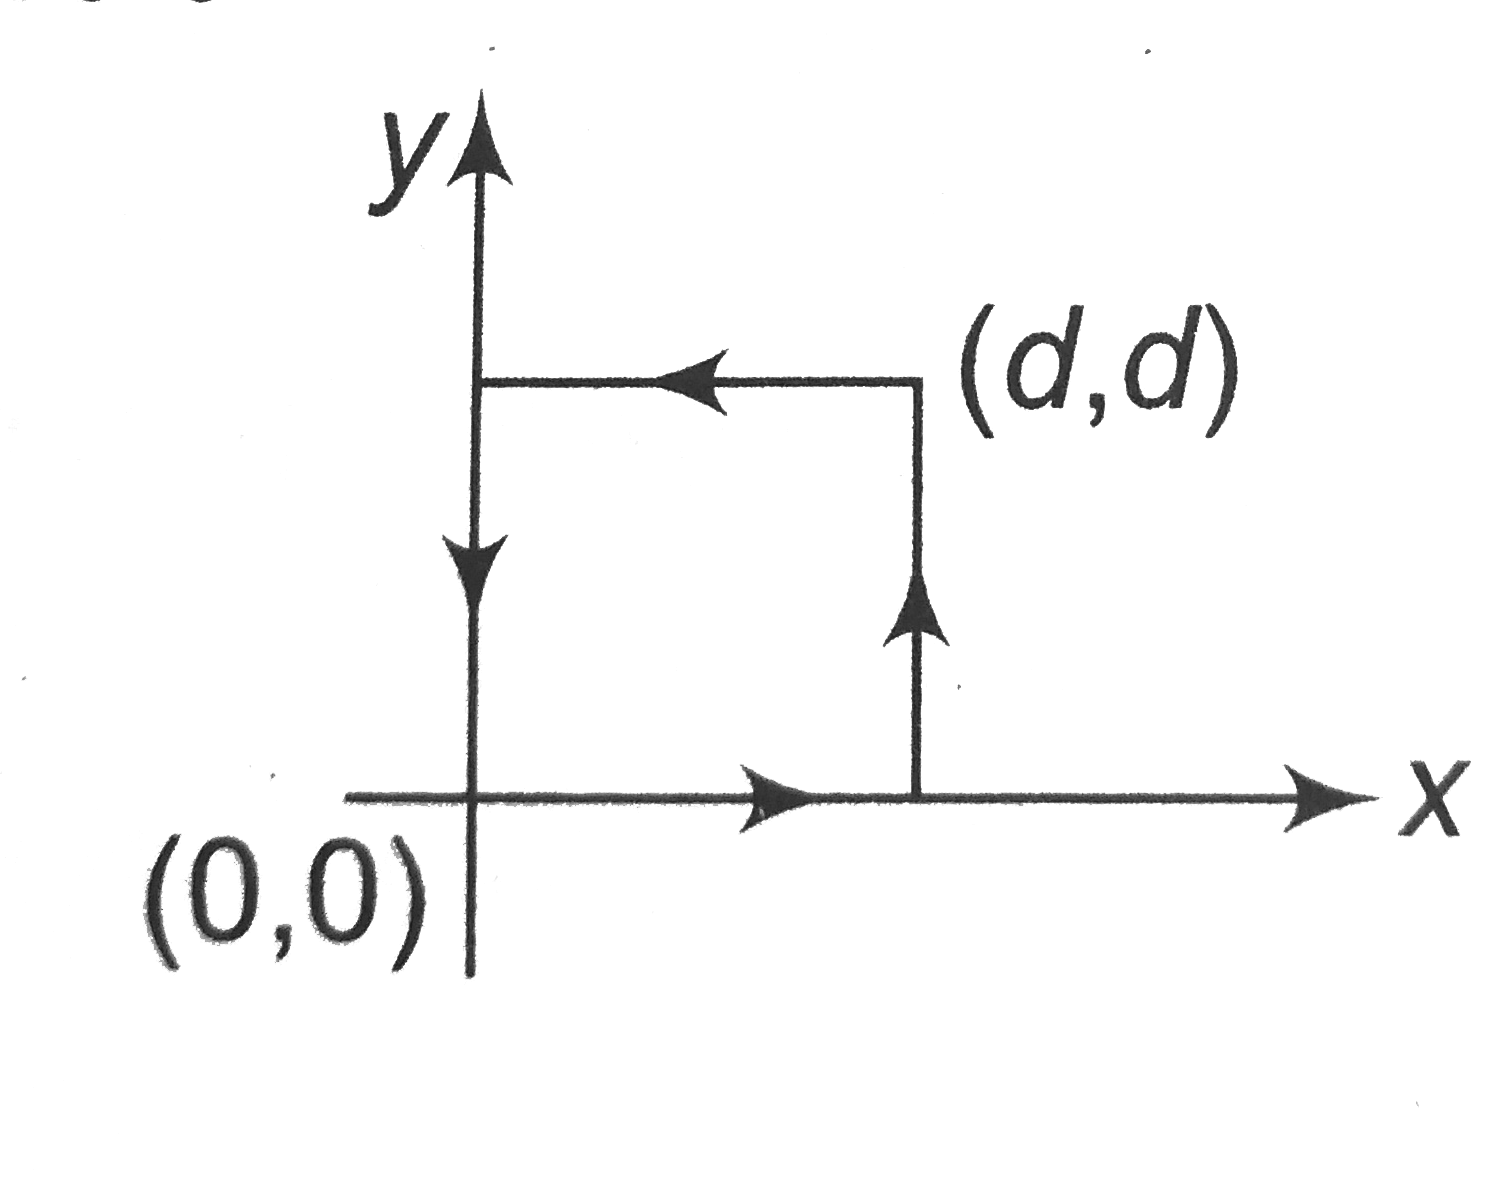 The work done by the force = vec F = A (y^(2) hati + 2 x^(2) hatj), where A is a constant and x and y are in meters around the path shown is.